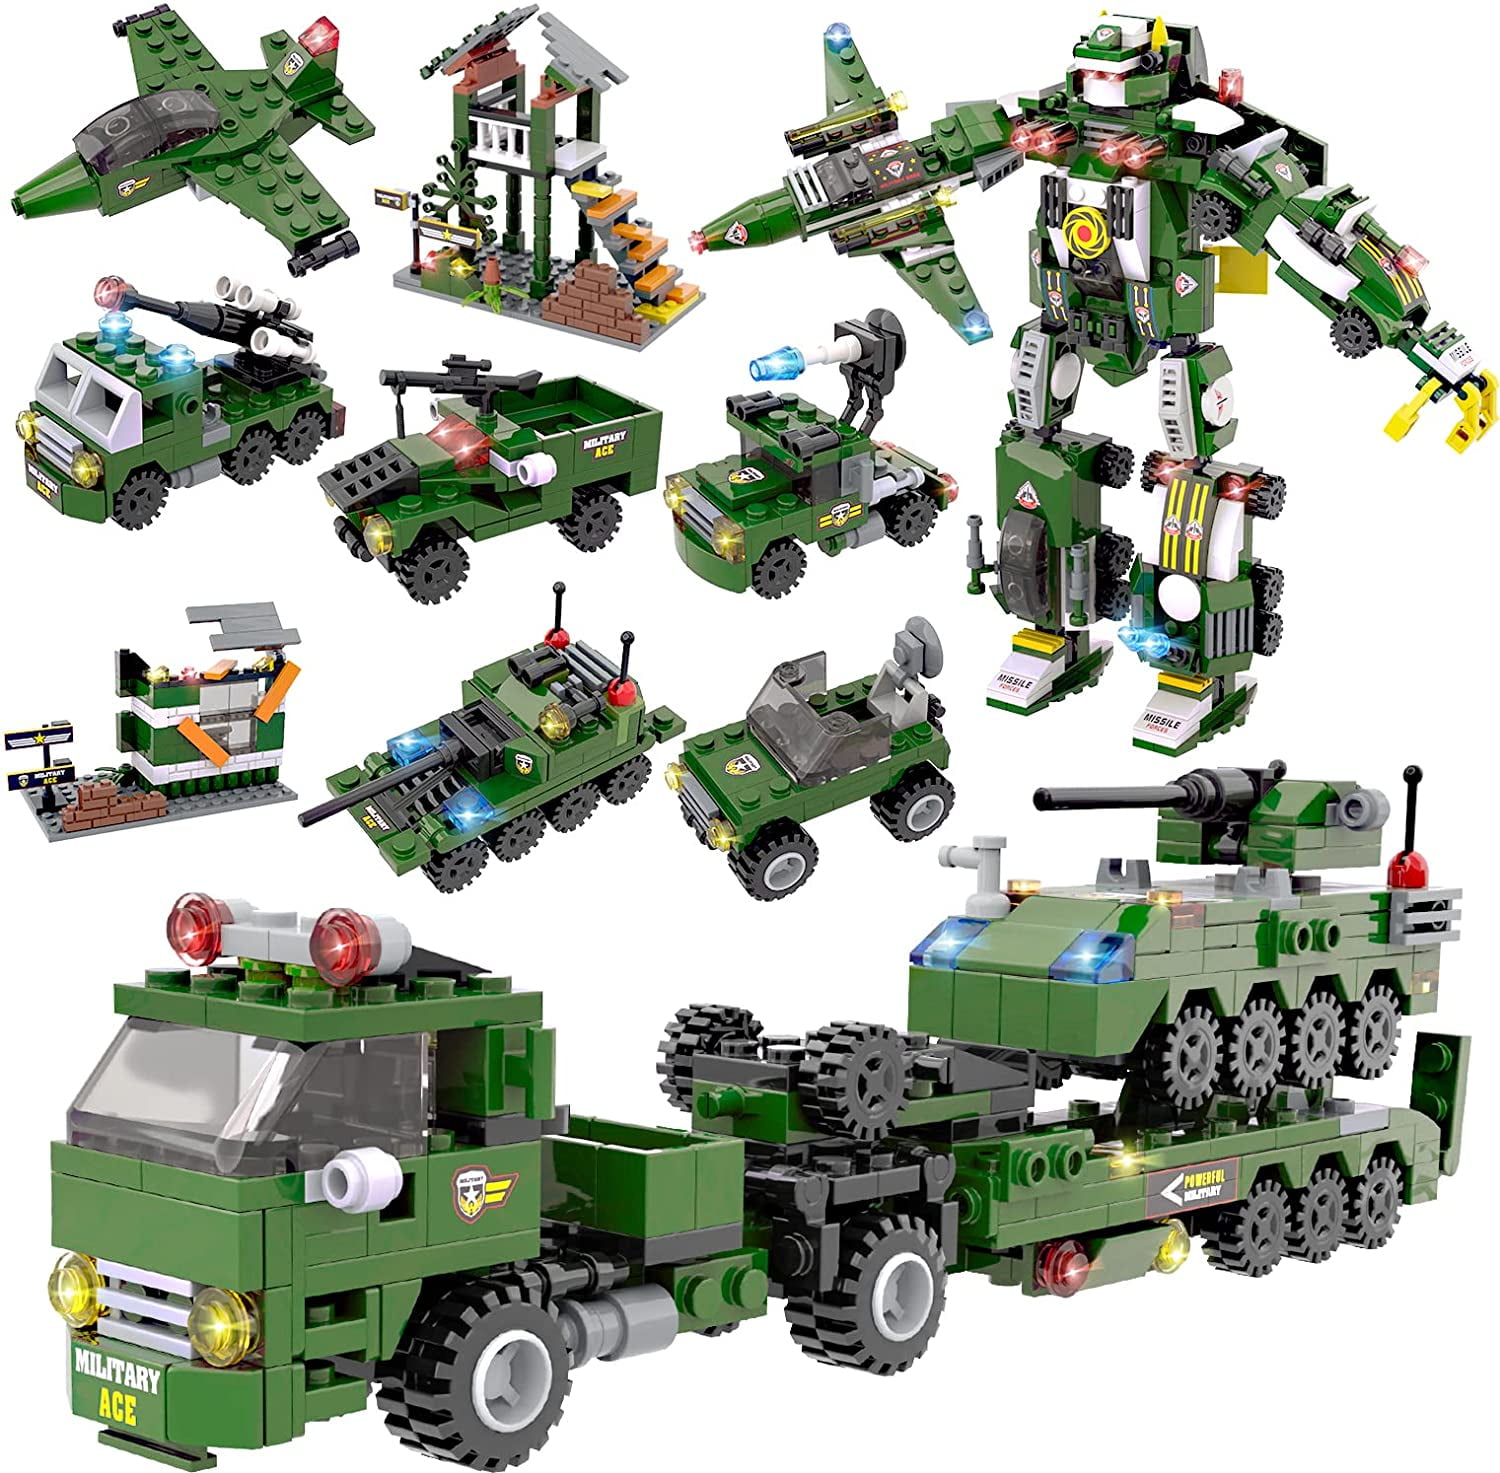 1552 Pieces Exercise N Play Military Army Building Kit Creative Roleplay Building Toys for Kids Boys Age 6-12 Years Tank Building Blocks Sets with Storage Box 